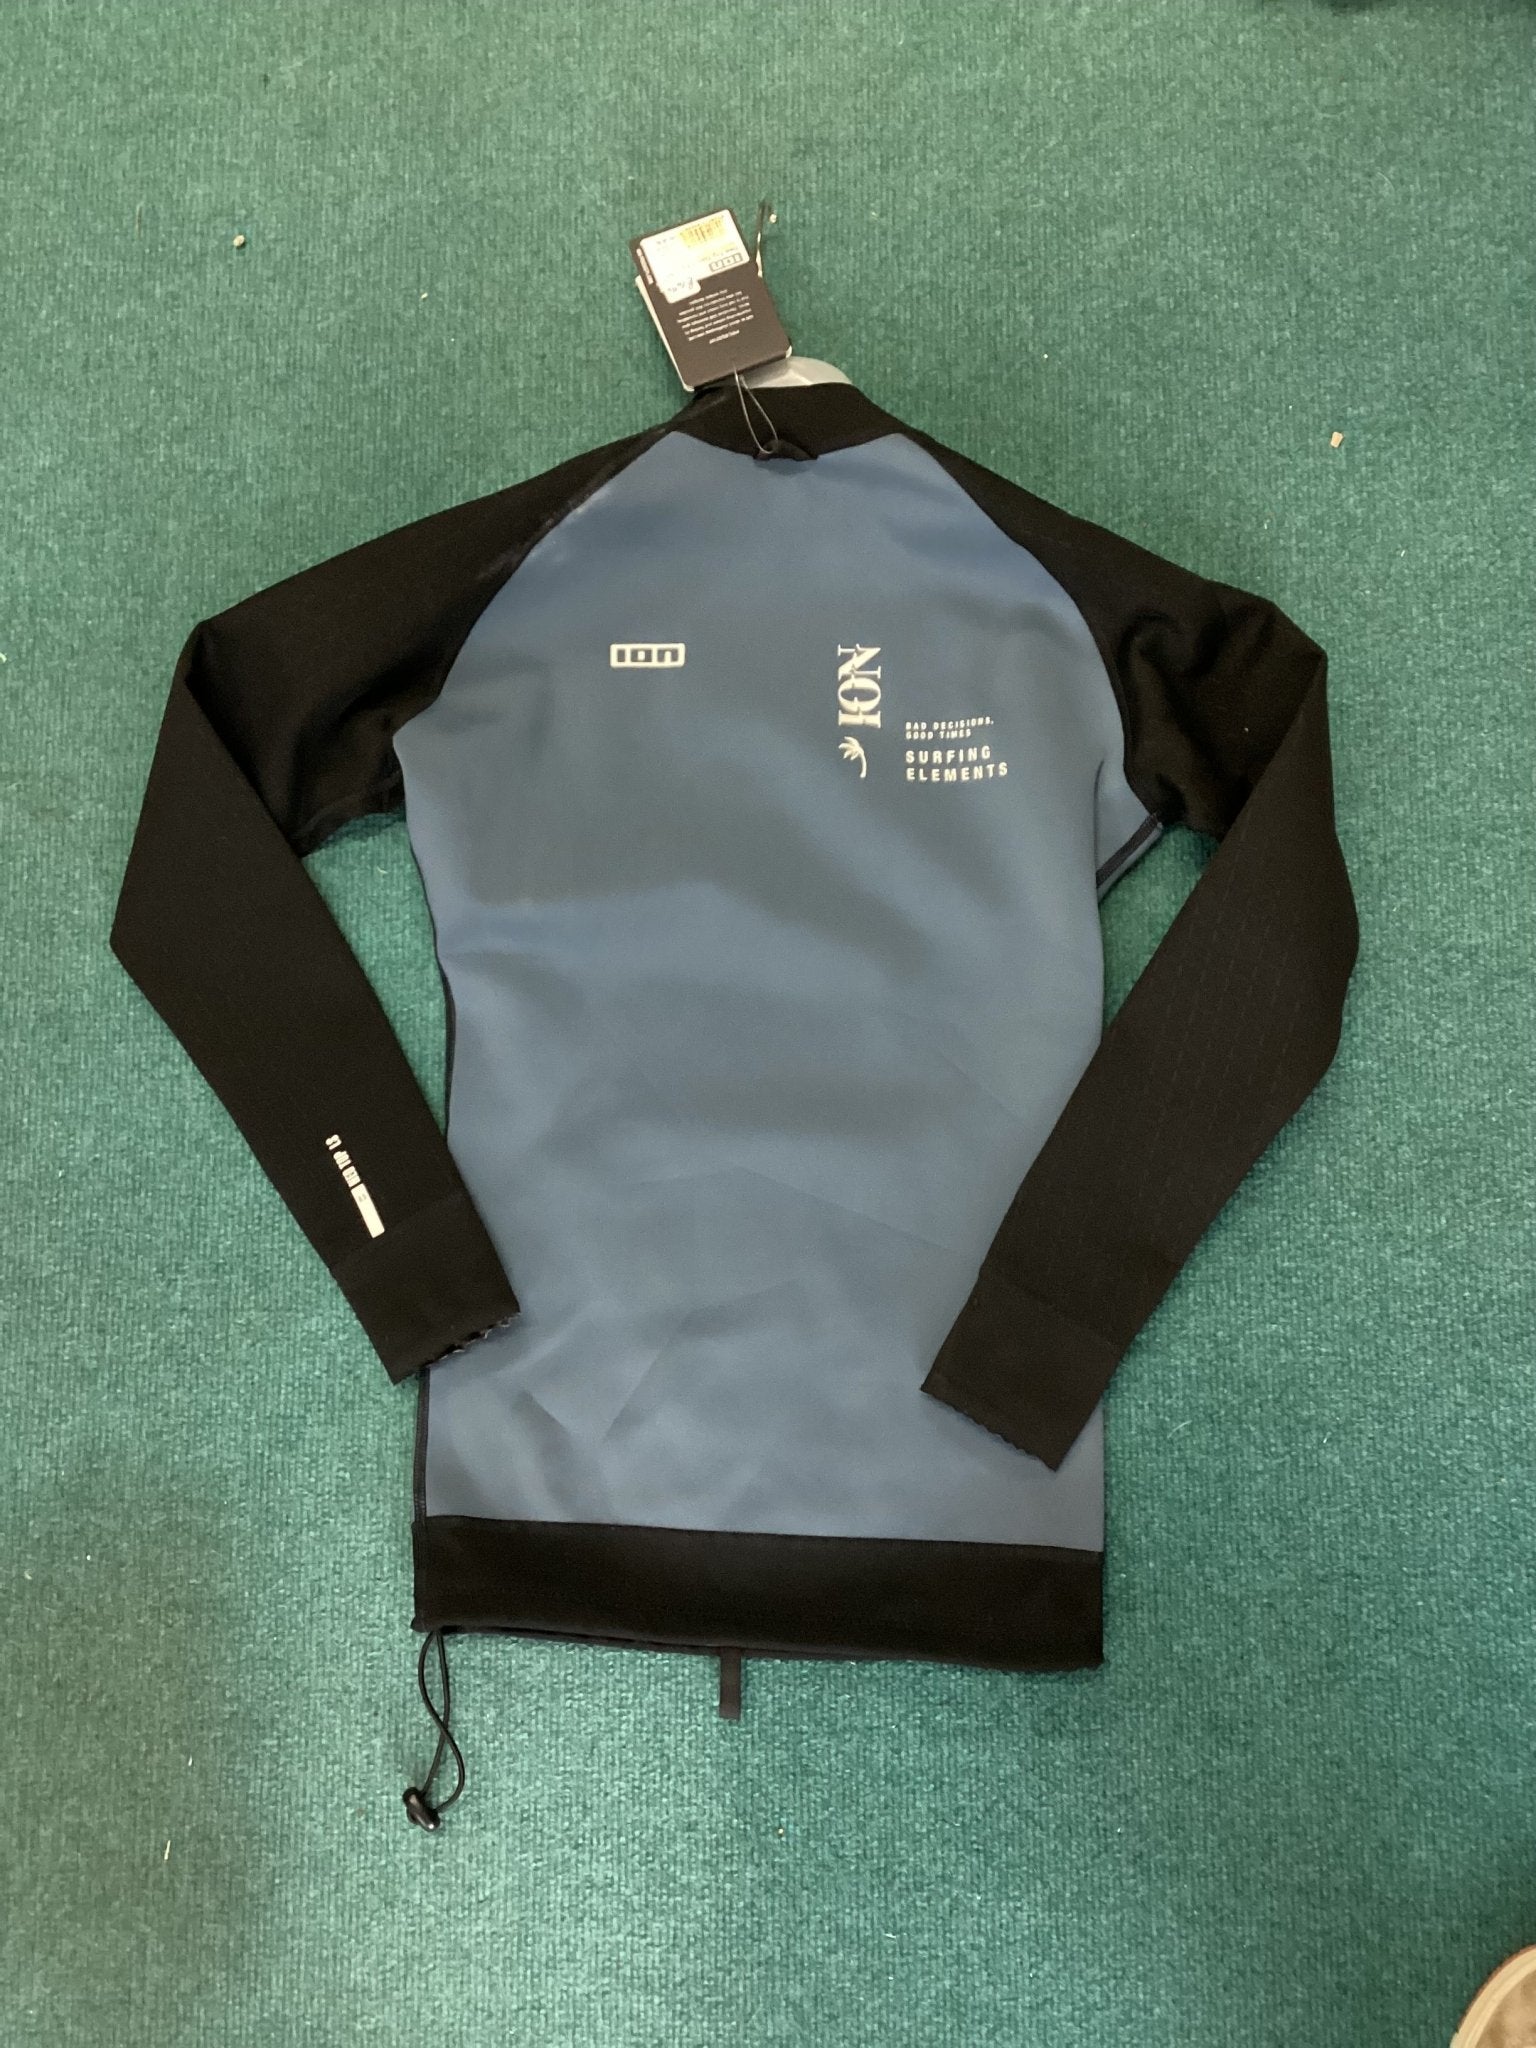 ION Neo Top Men steel blue/black size small - Worthing Watersports - Wetsuits - ION Water